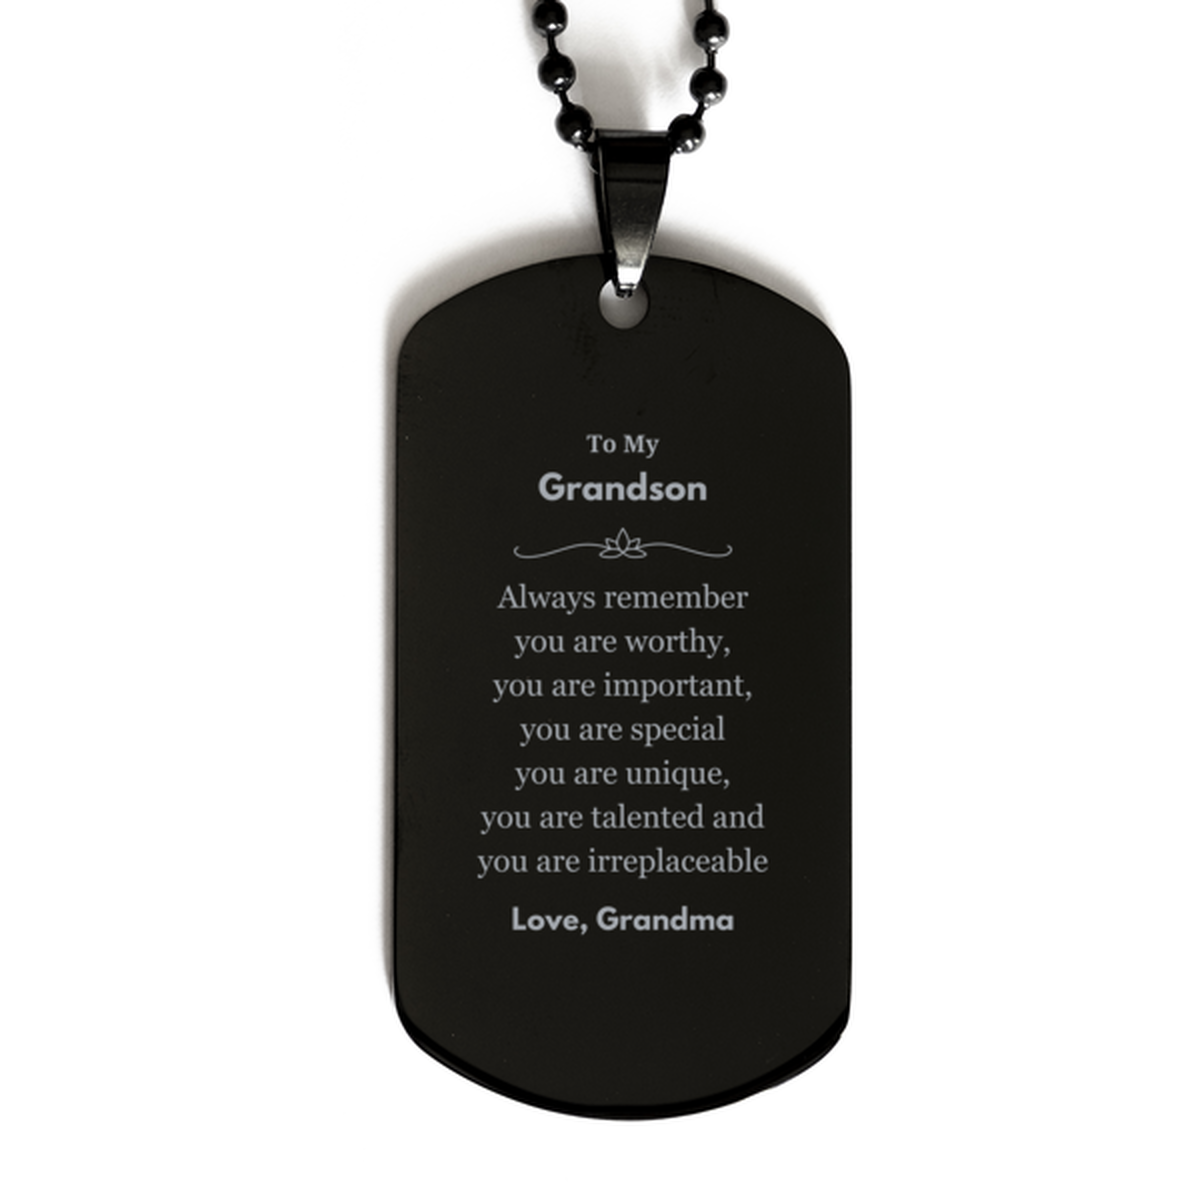 Grandson Birthday Gifts from Grandma, Inspirational Black Dog Tag for Grandson Christmas Graduation Gifts for Grandson Always remember you are worthy, you are important. Love, Grandma